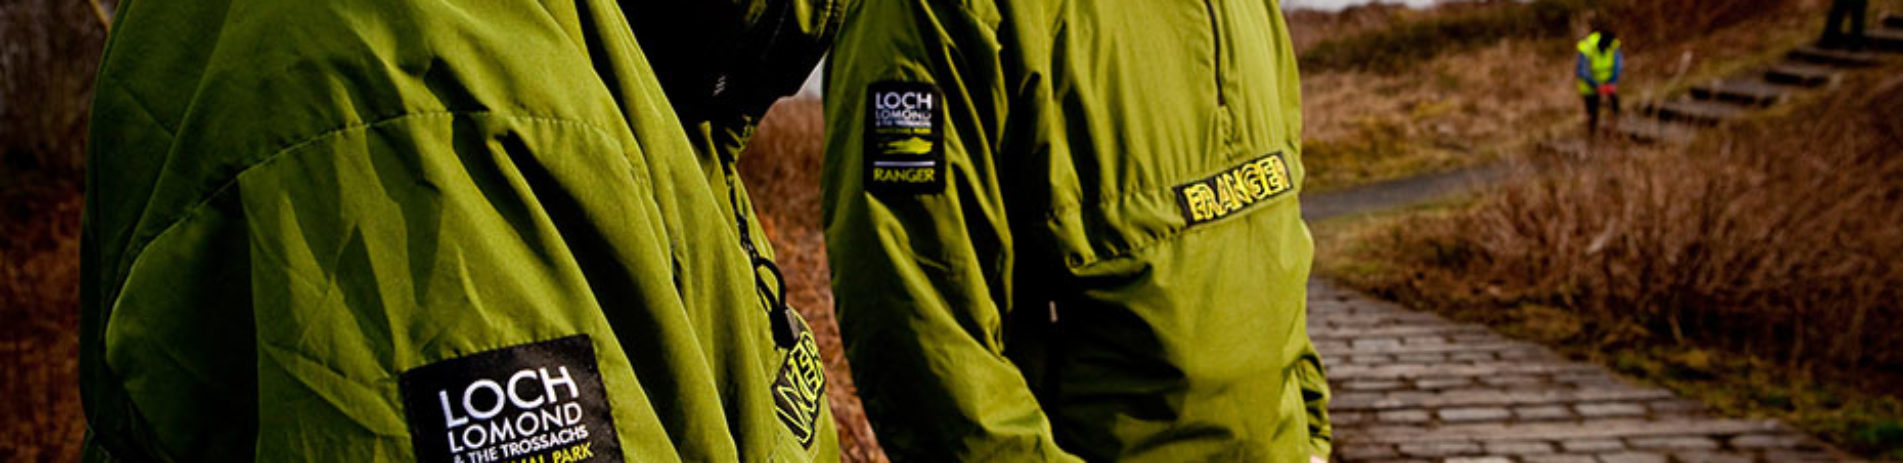 close-up-on-two-rangers-green-jackets-with-national-park-logo-and-ranger-word-visible-on-their-sleeve-and-chest